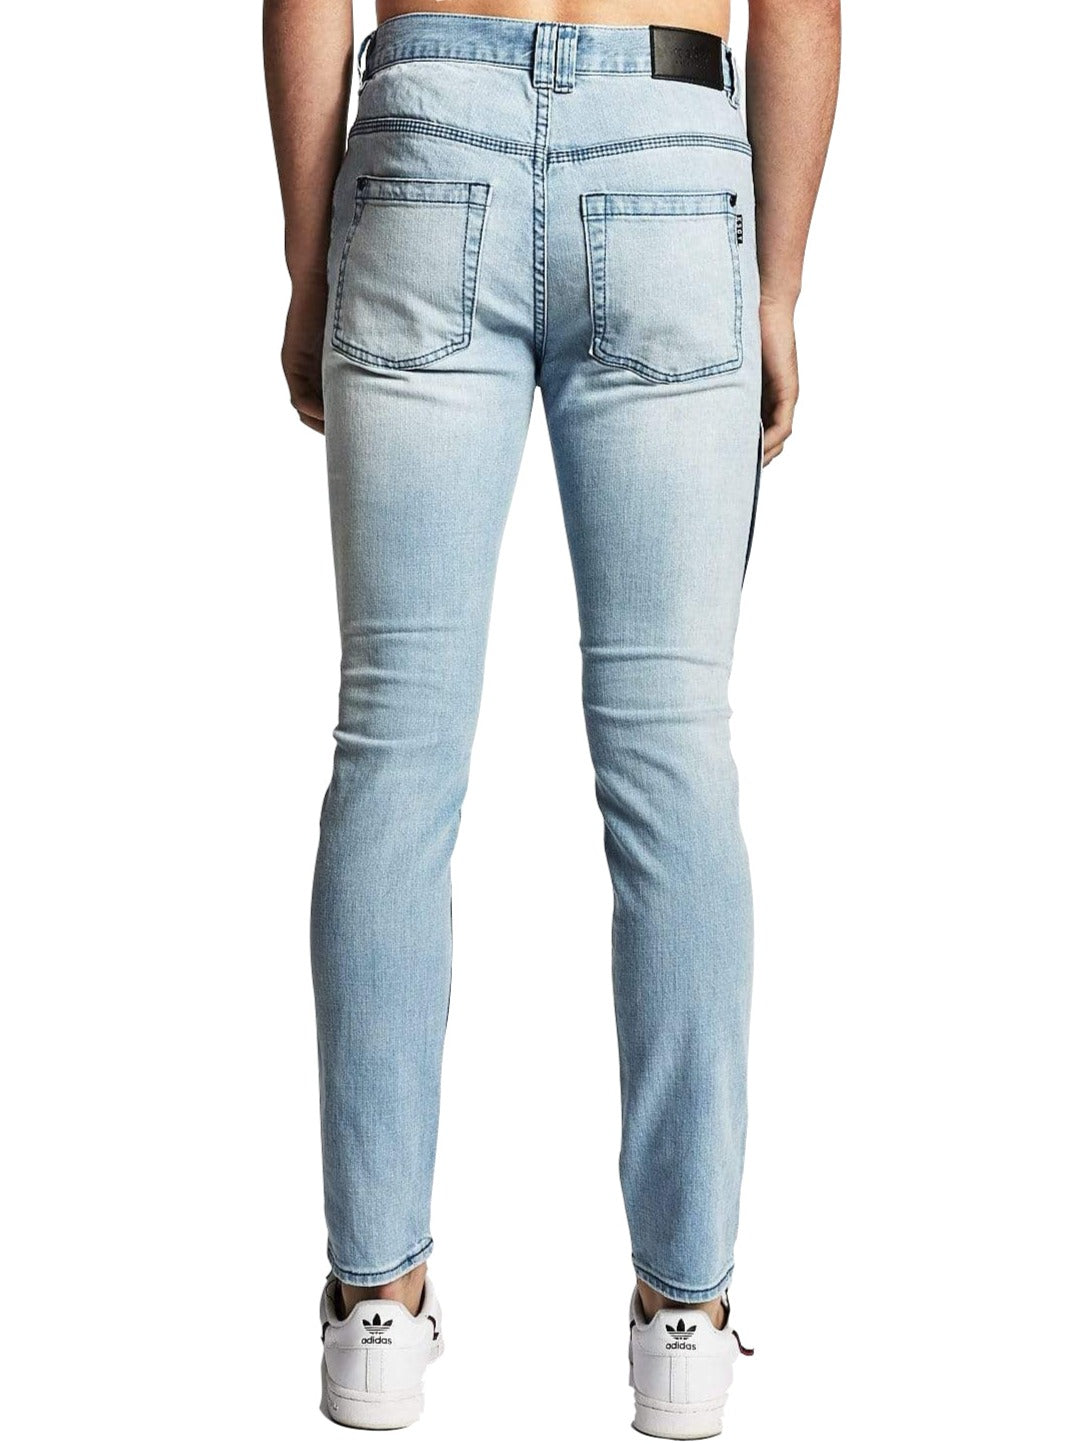 Kiss Chacey - Midtown Slim Fit Jean - Defiance Blue